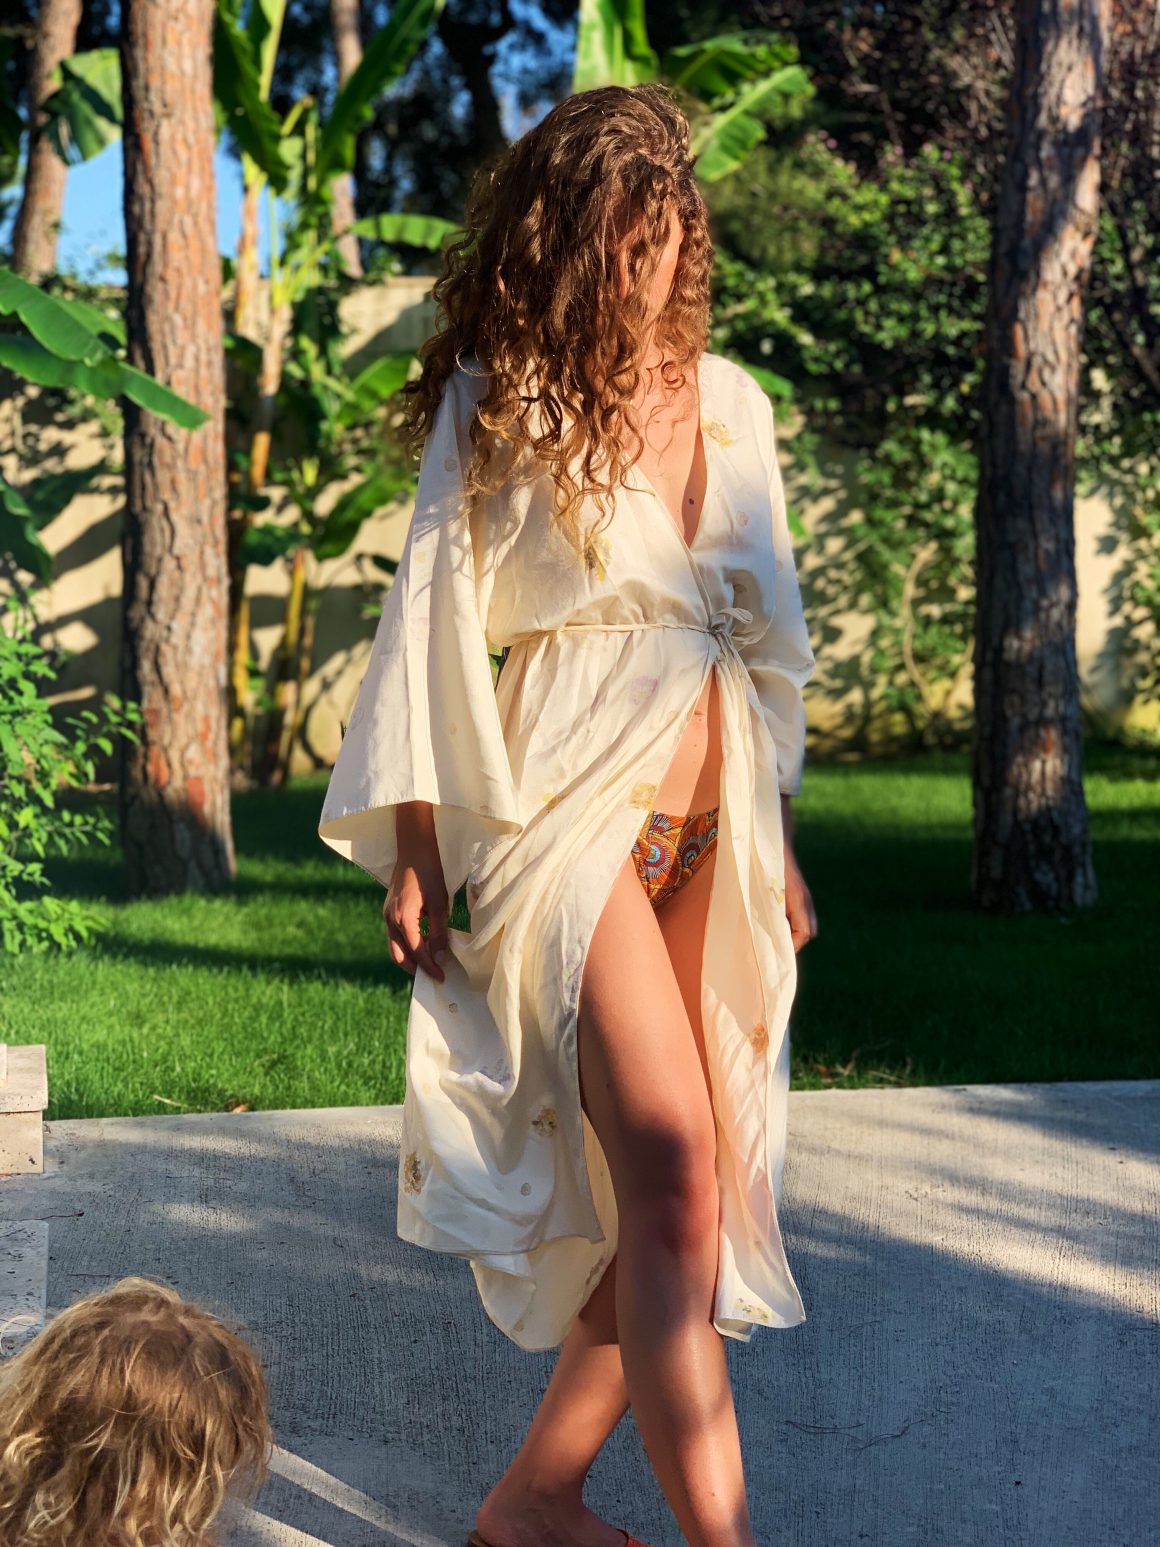 Realmomster Holiday Sunset Petit Mioche Silk Robe